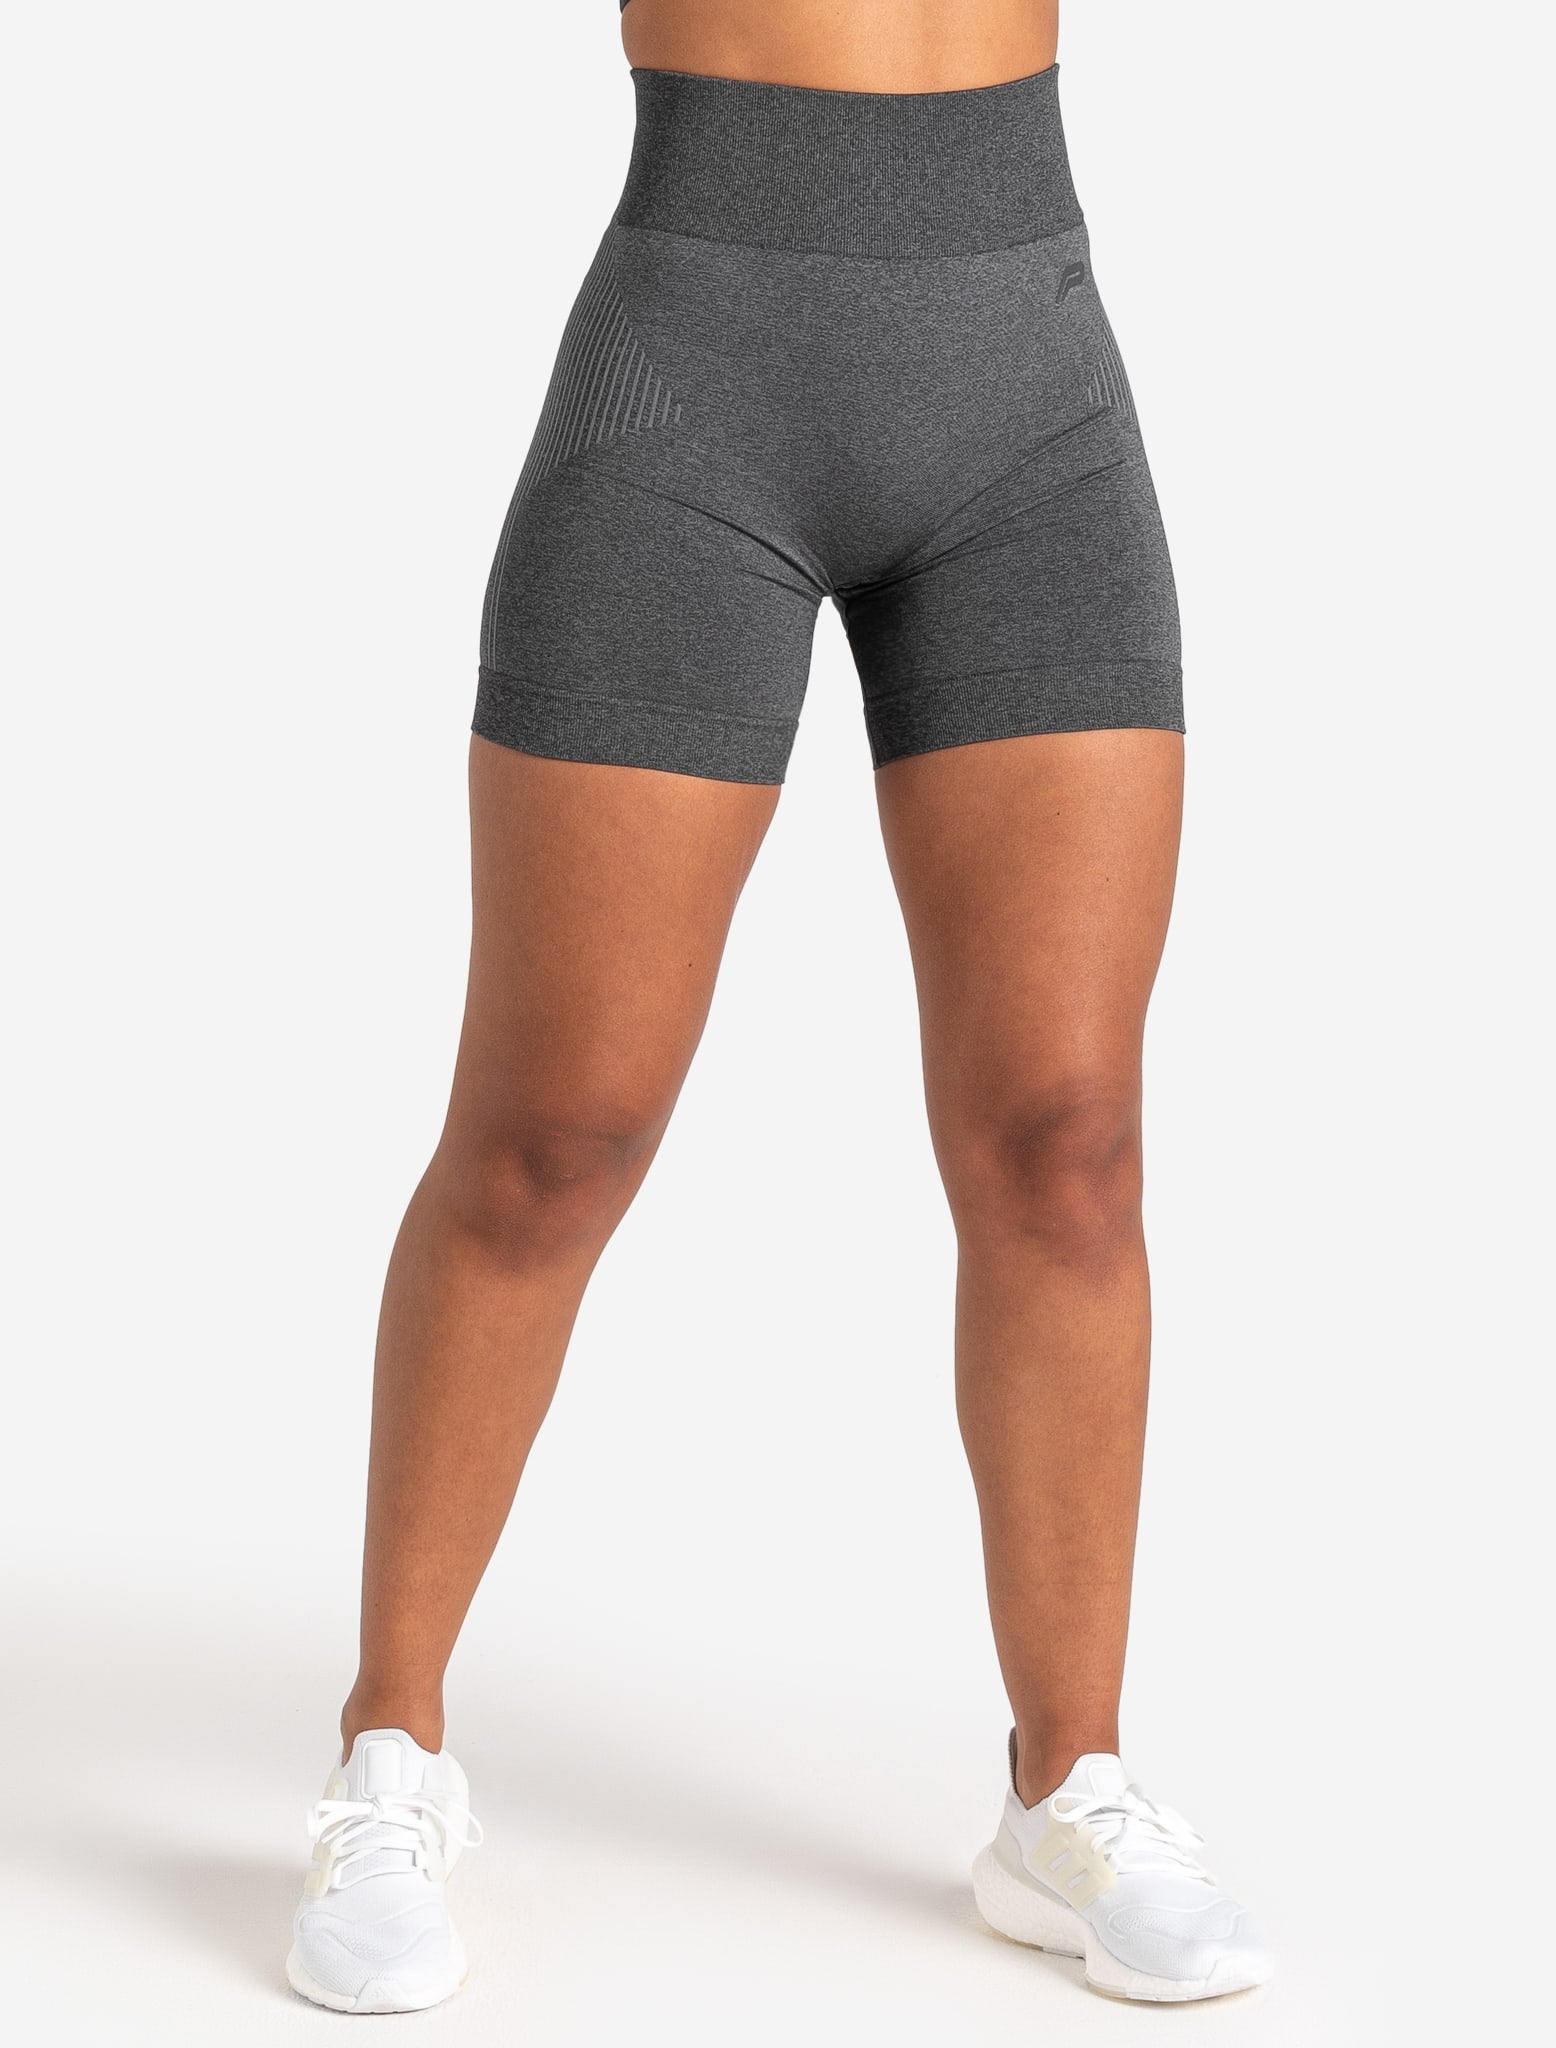 ADAPT 2.0 Seamless Shorts - Charcoal Pursue Fitness 1